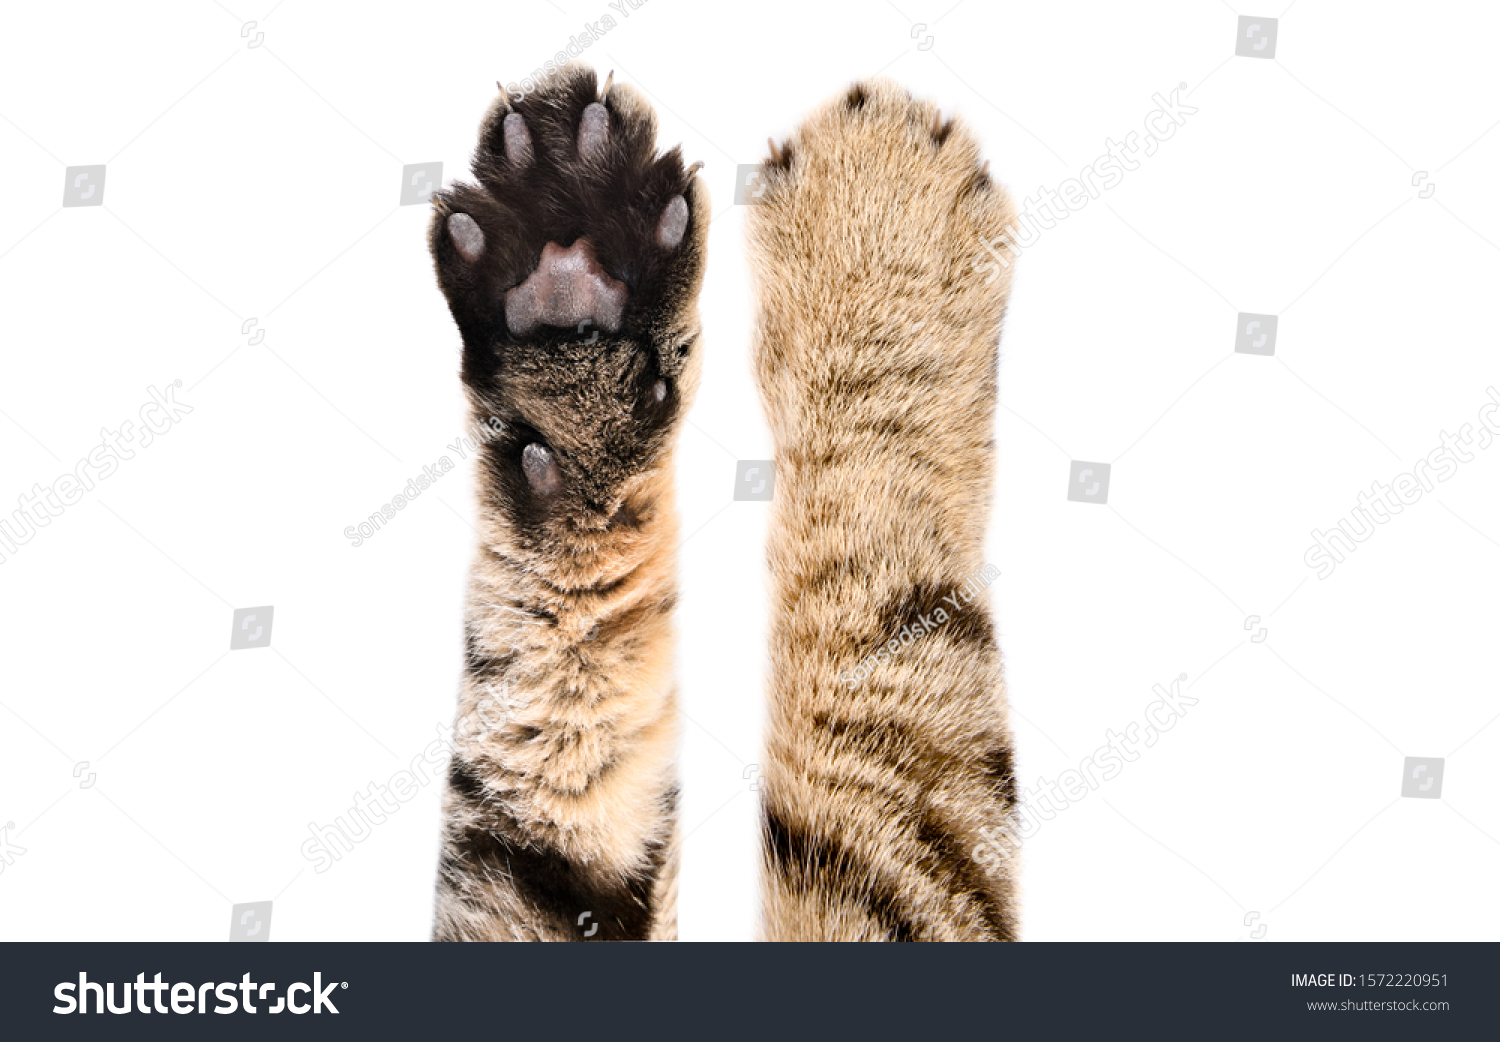 Paws of a cat Scottish Straight, isolated on white background, closeup #1572220951